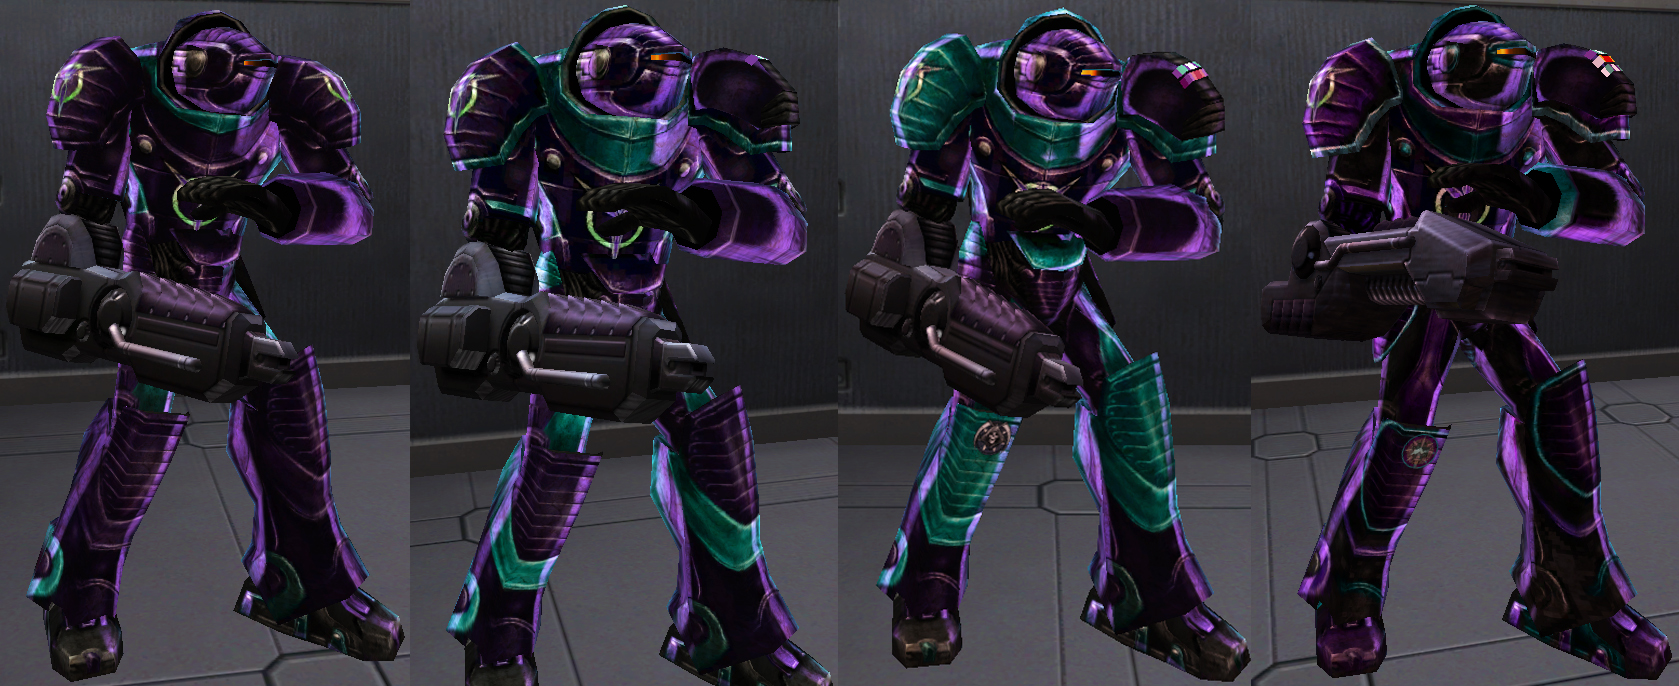  MAX Armor at, from left to right,
Battle Rank 1, 7, 14 and 25